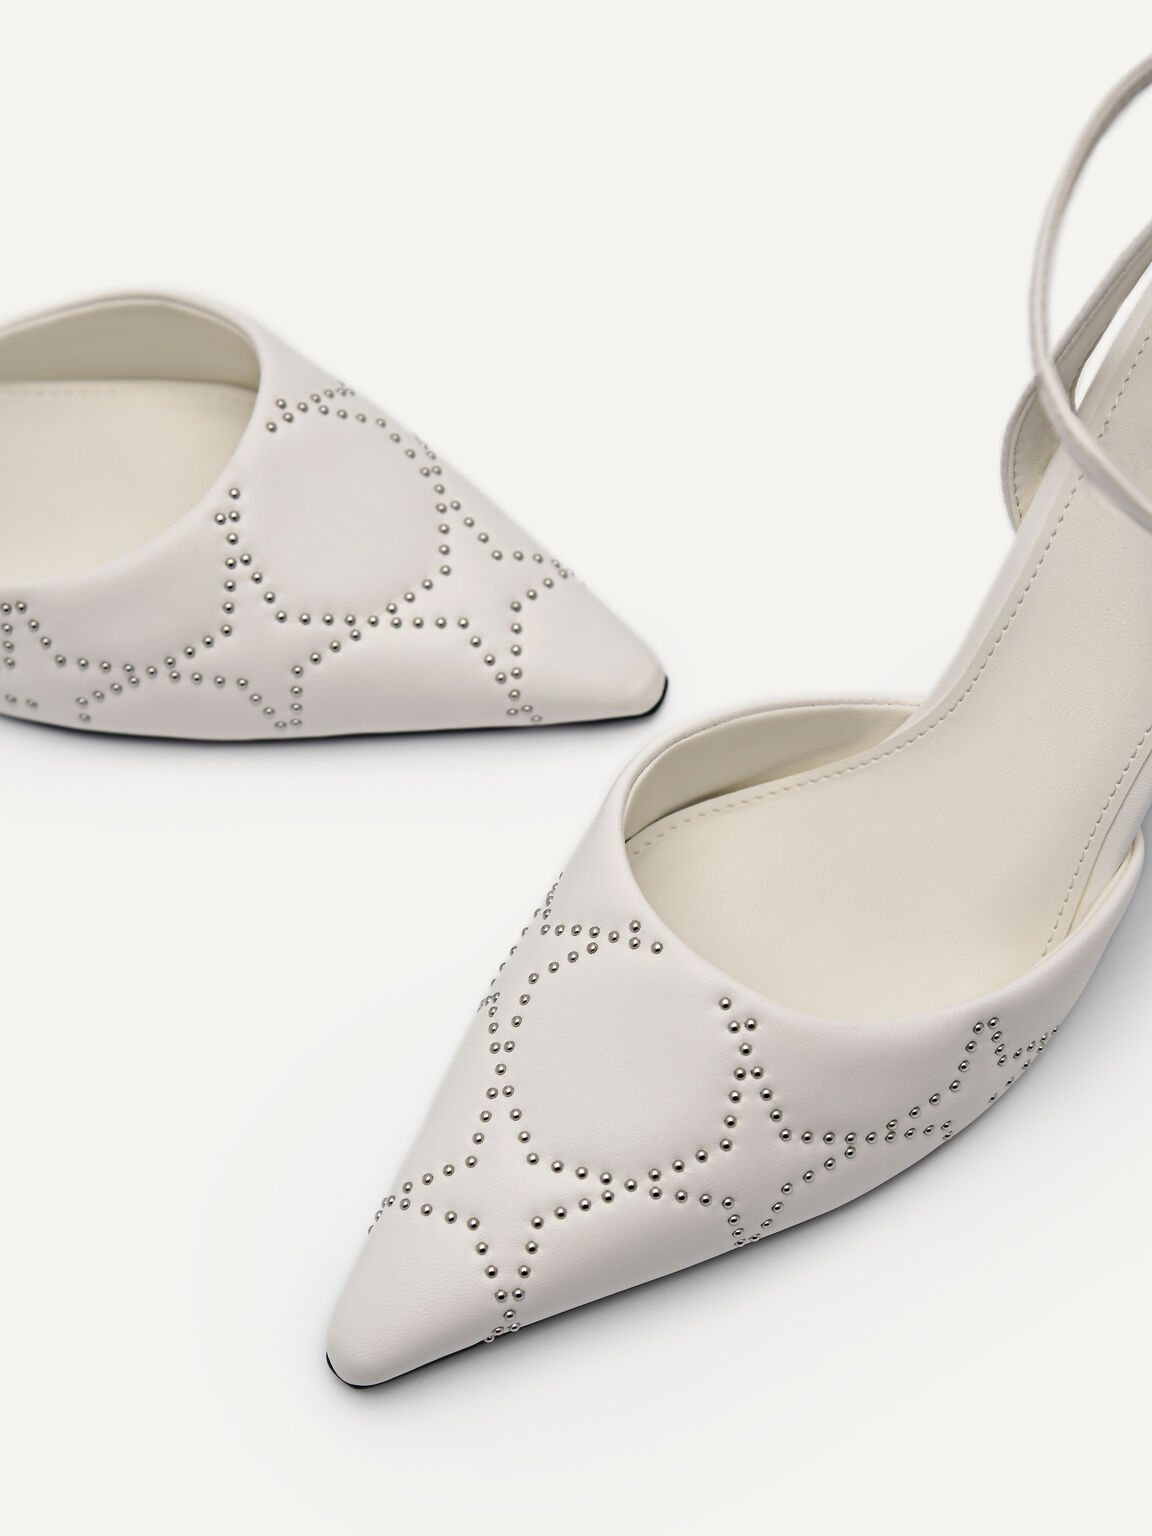 Joan Leather Pumps, White, hi-res